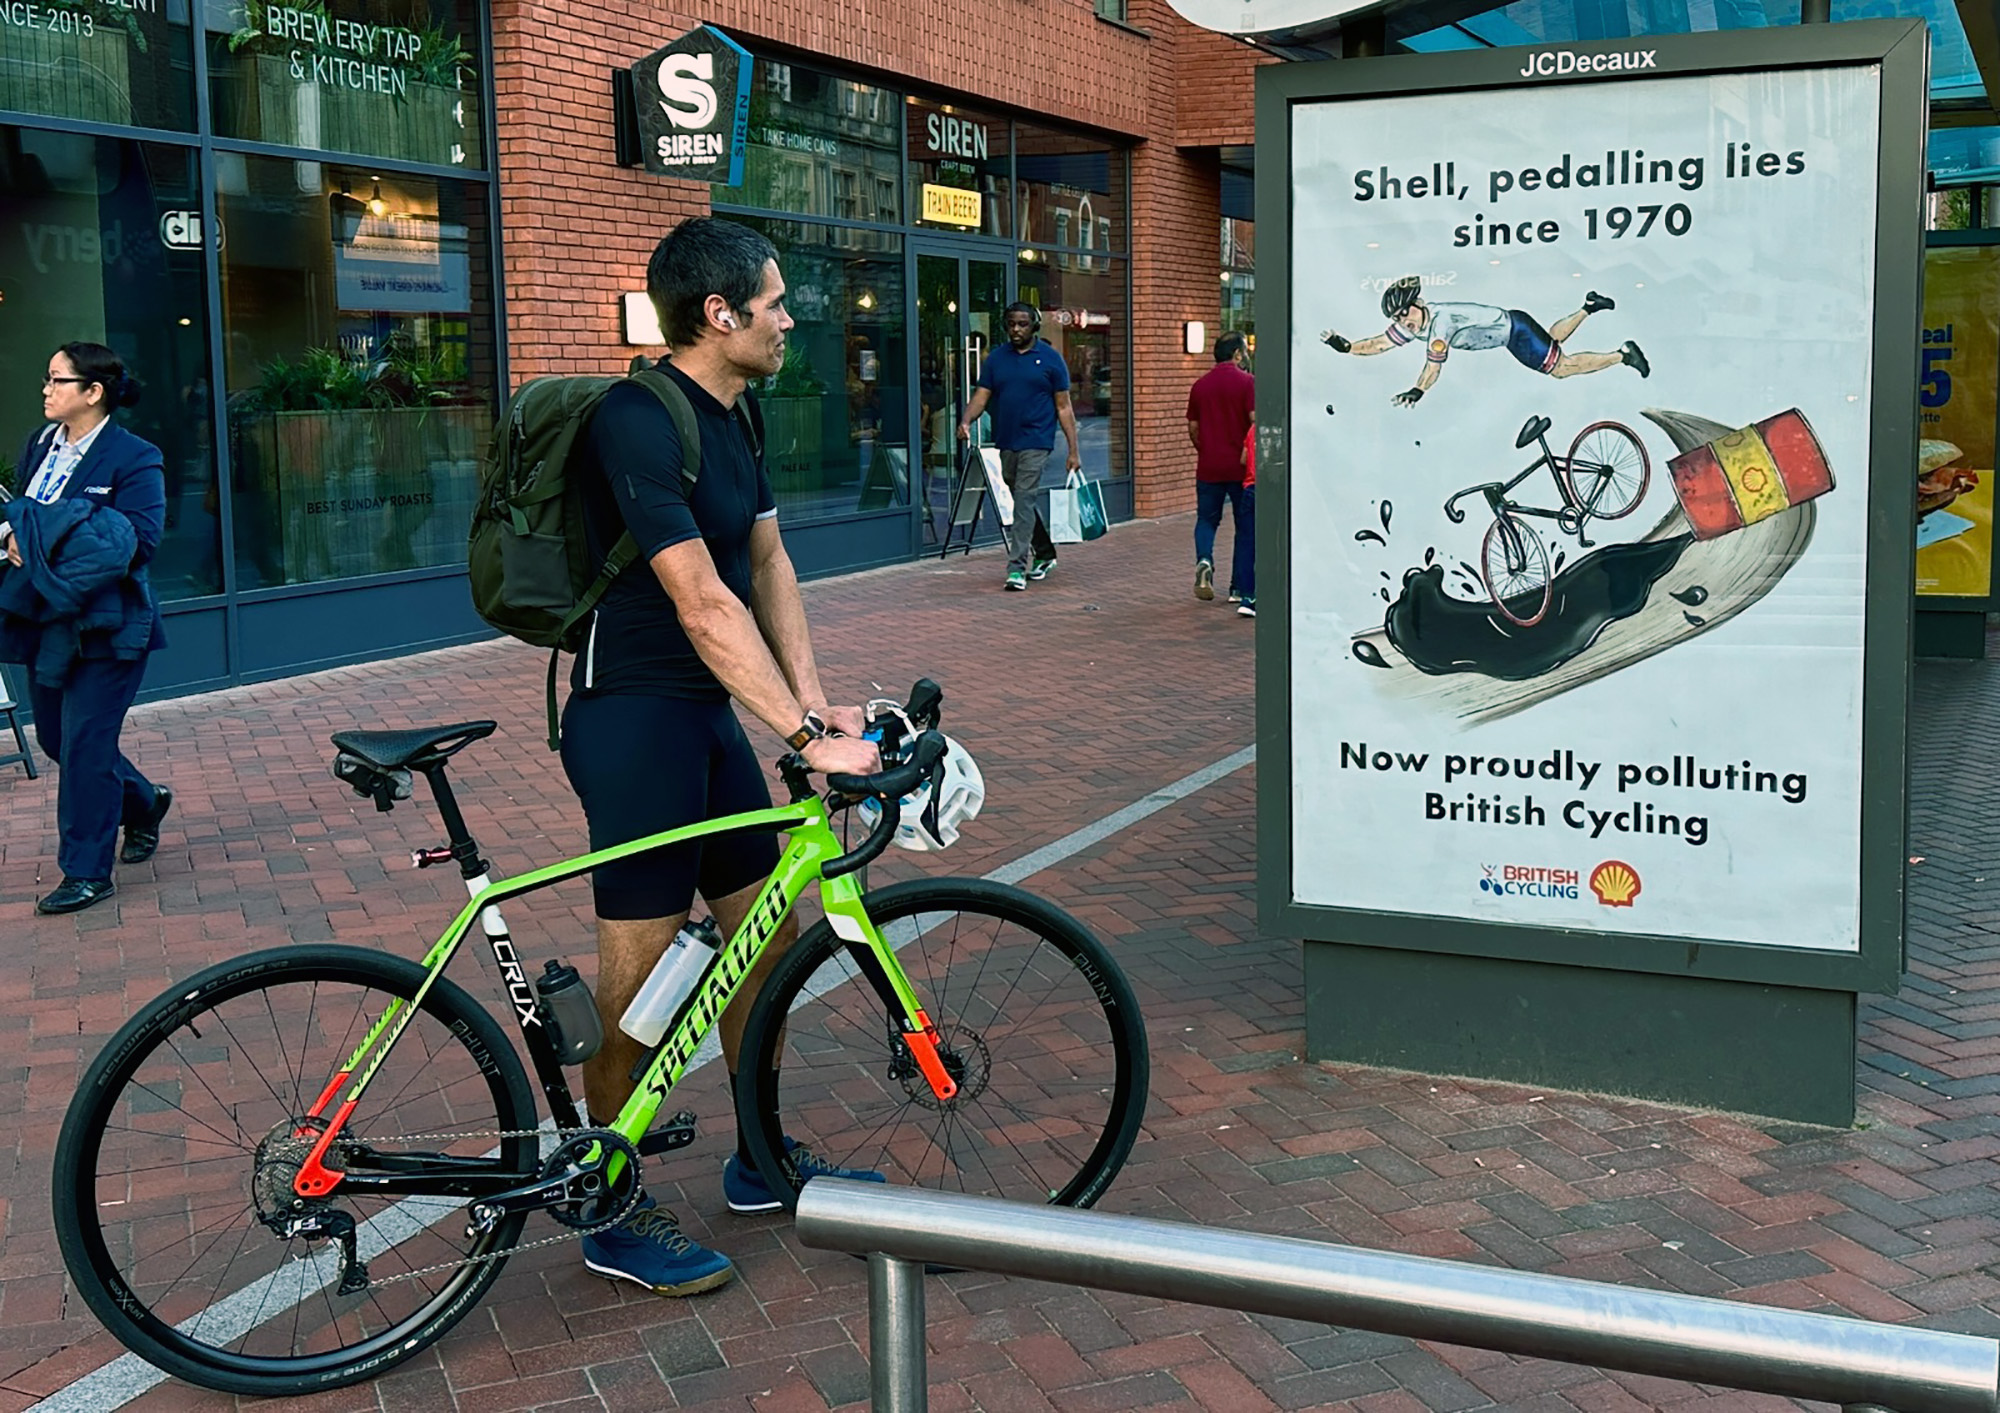 A poster protesting Shell and its sponsorship of British Cycling.